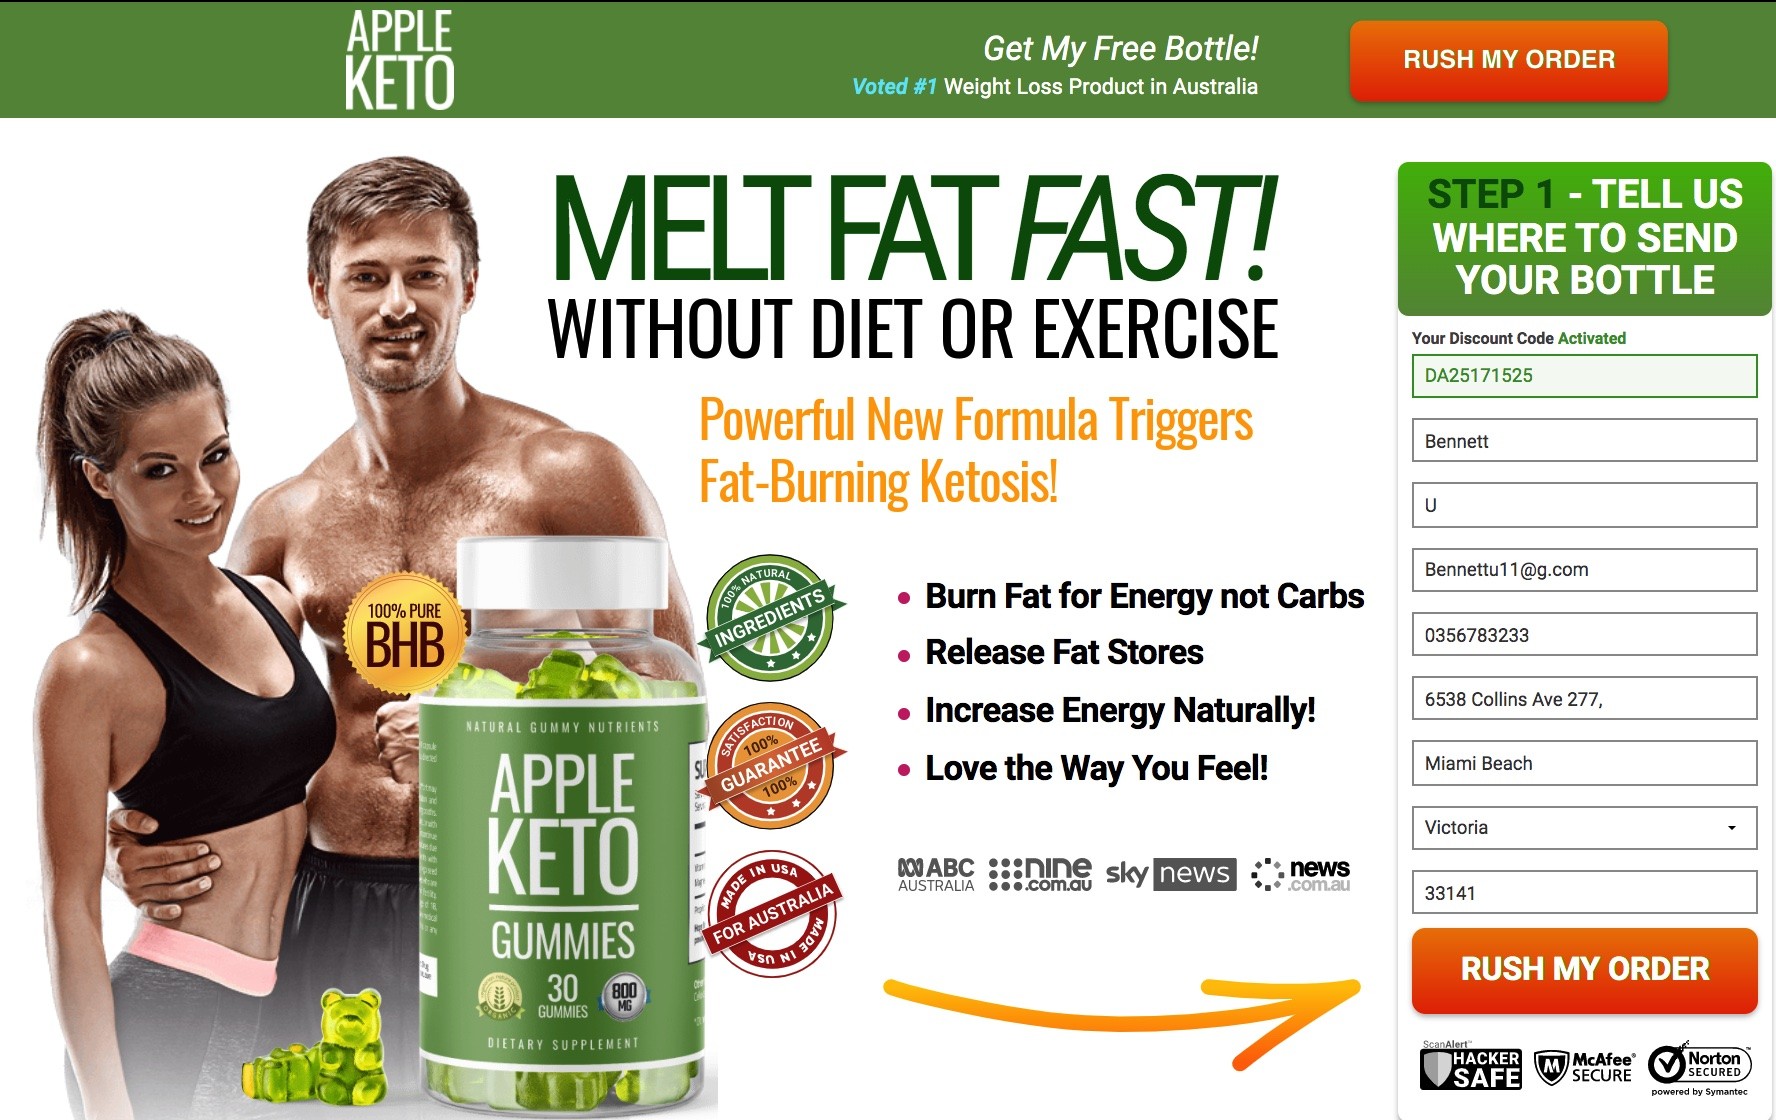 Apple Keto Gummies - Weight Loss Results, Ingredients, Scam, Shark Tank?